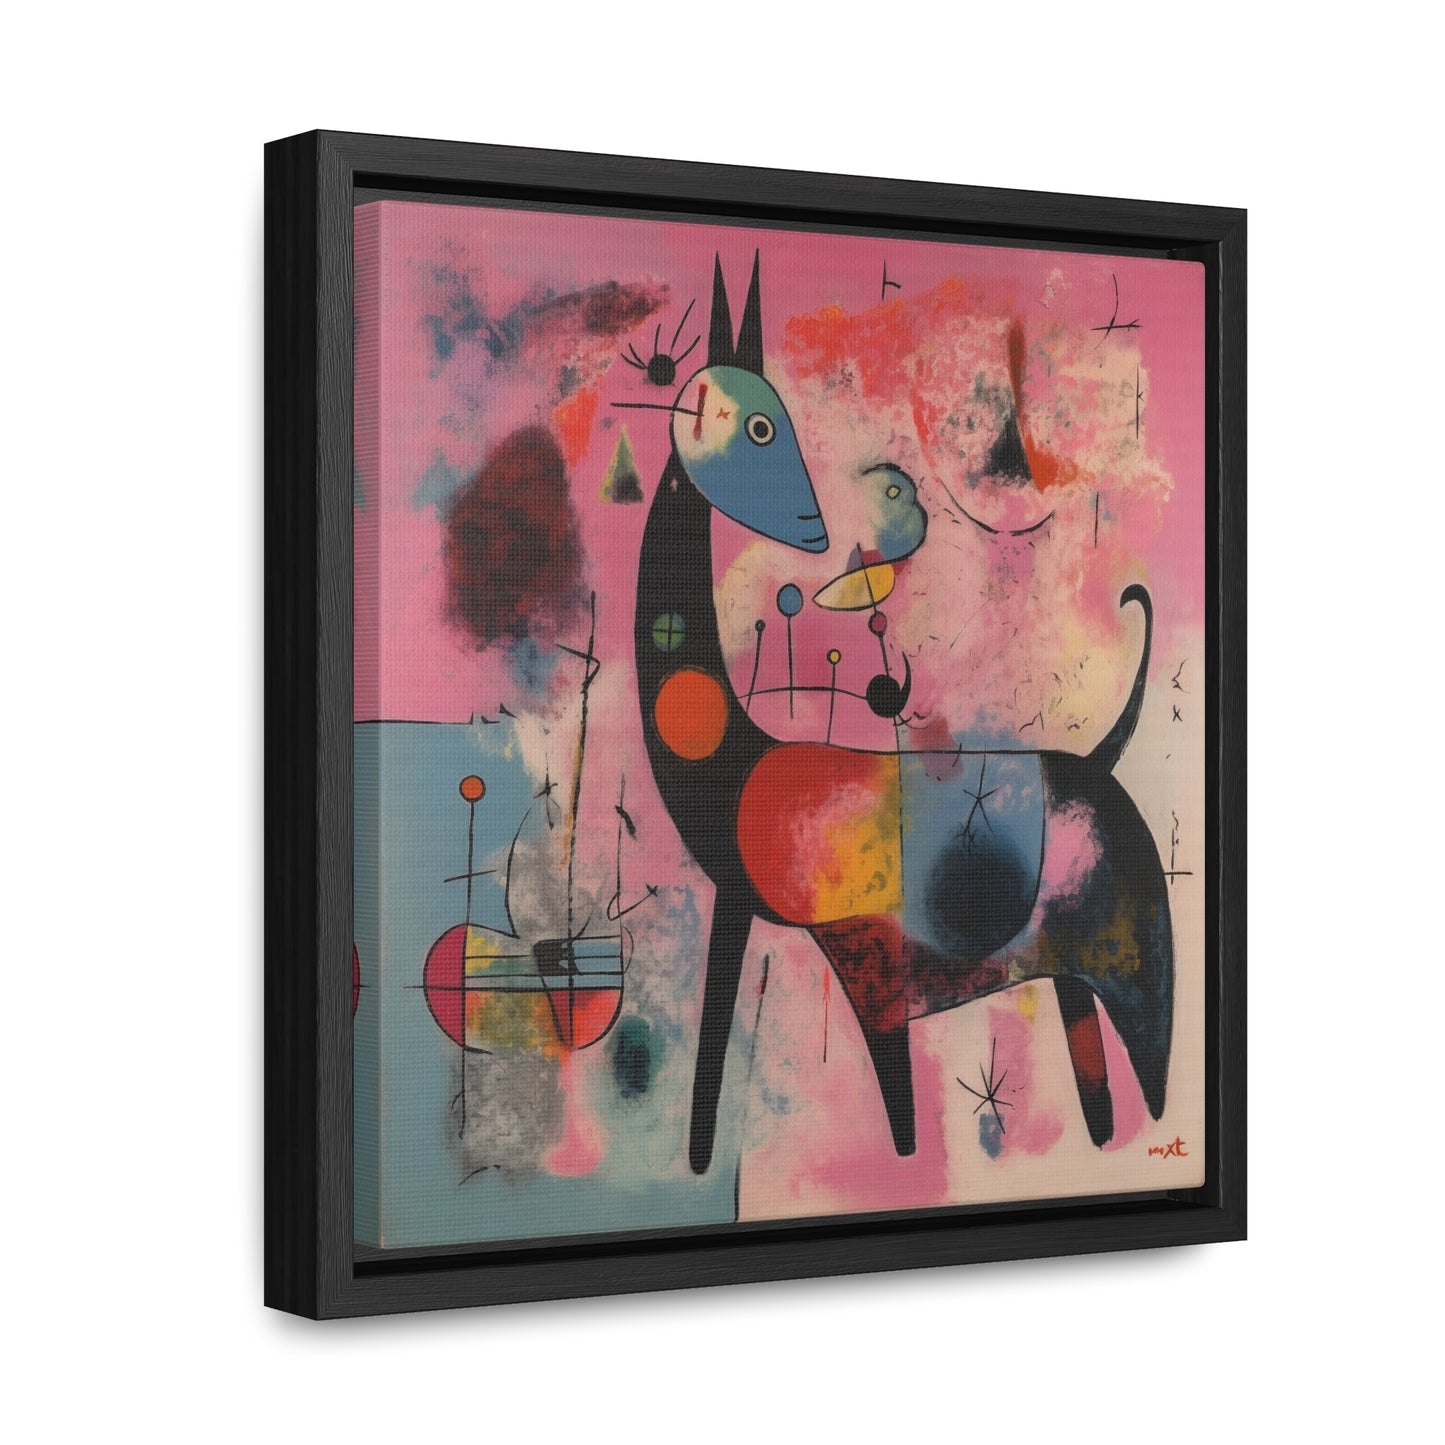 The Dreams of the Child 30, Gallery Canvas Wraps, Square Frame